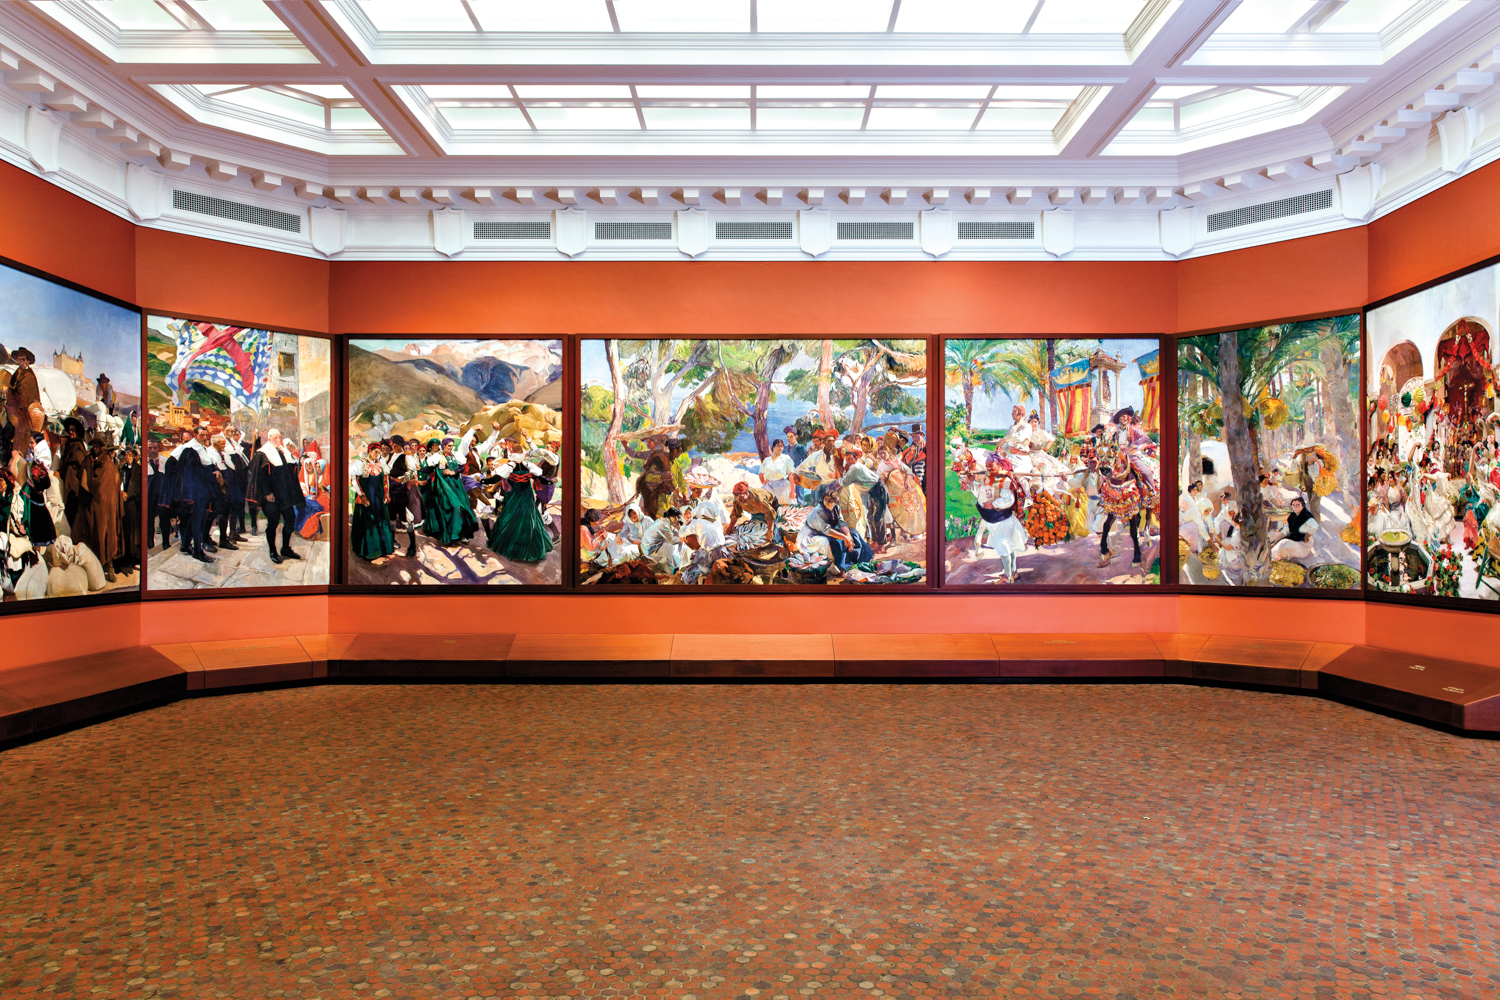 Gallery wall covered with a row of large paintings under a windowed ceiling